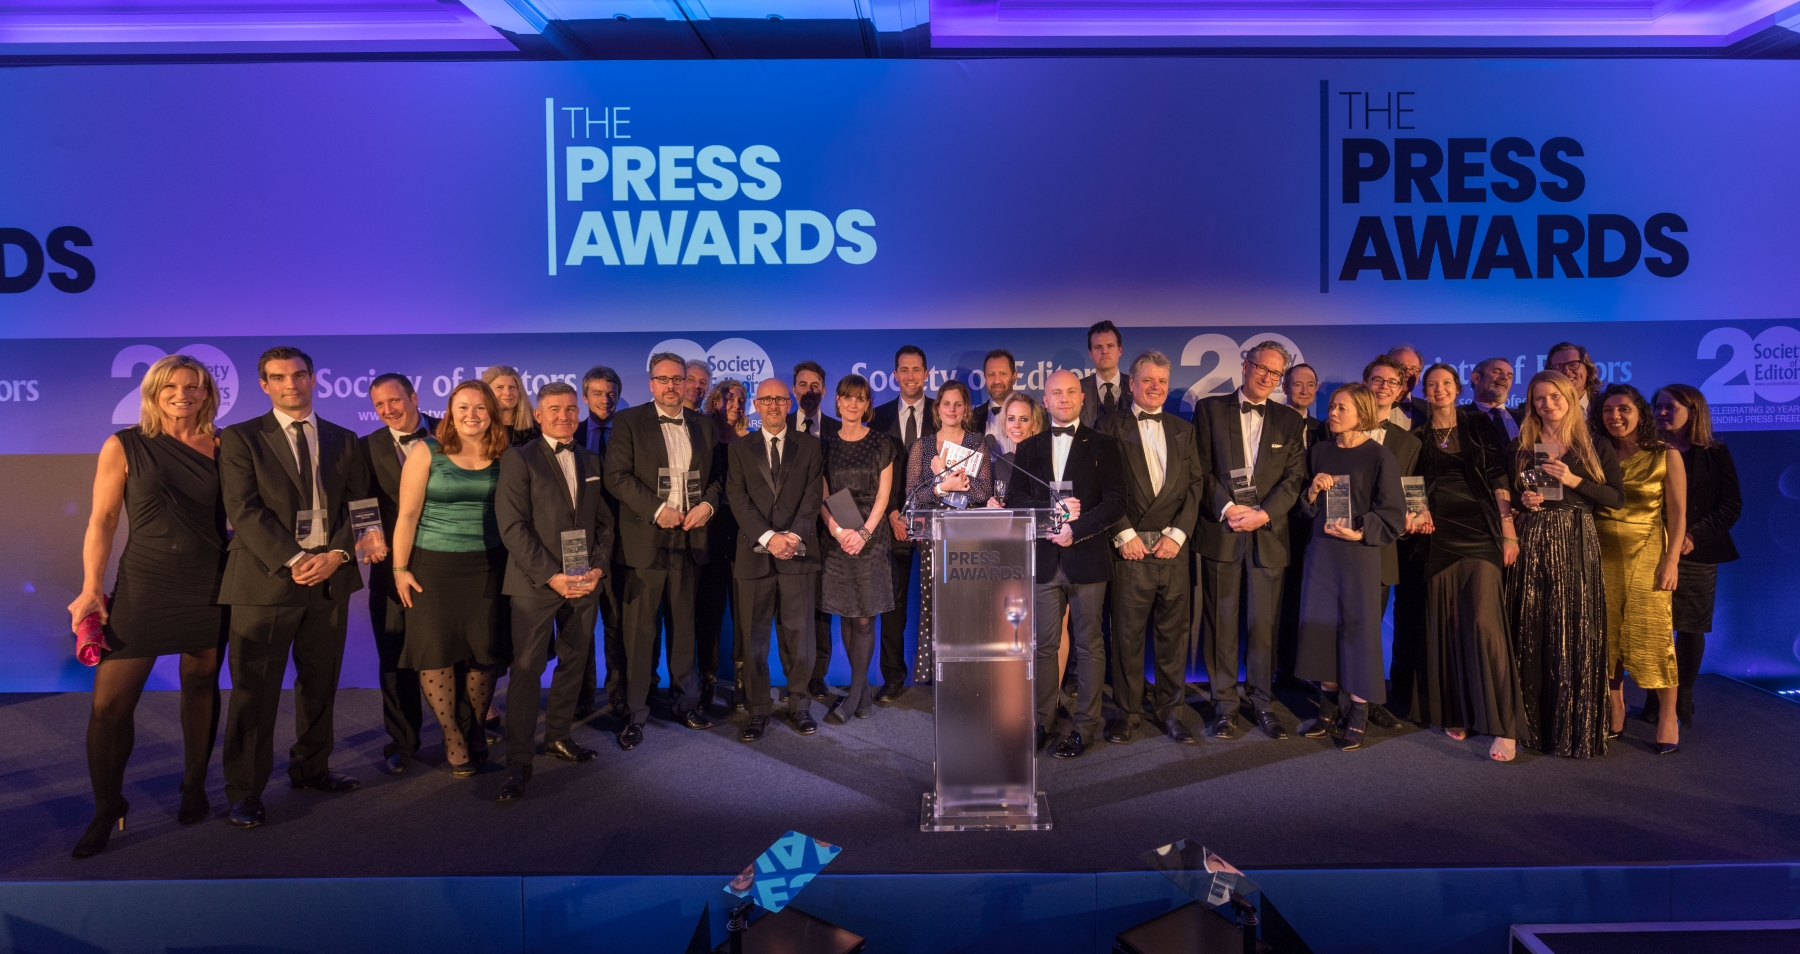 The Press Awards reminds us that writers of colour are still an afterthought in British media